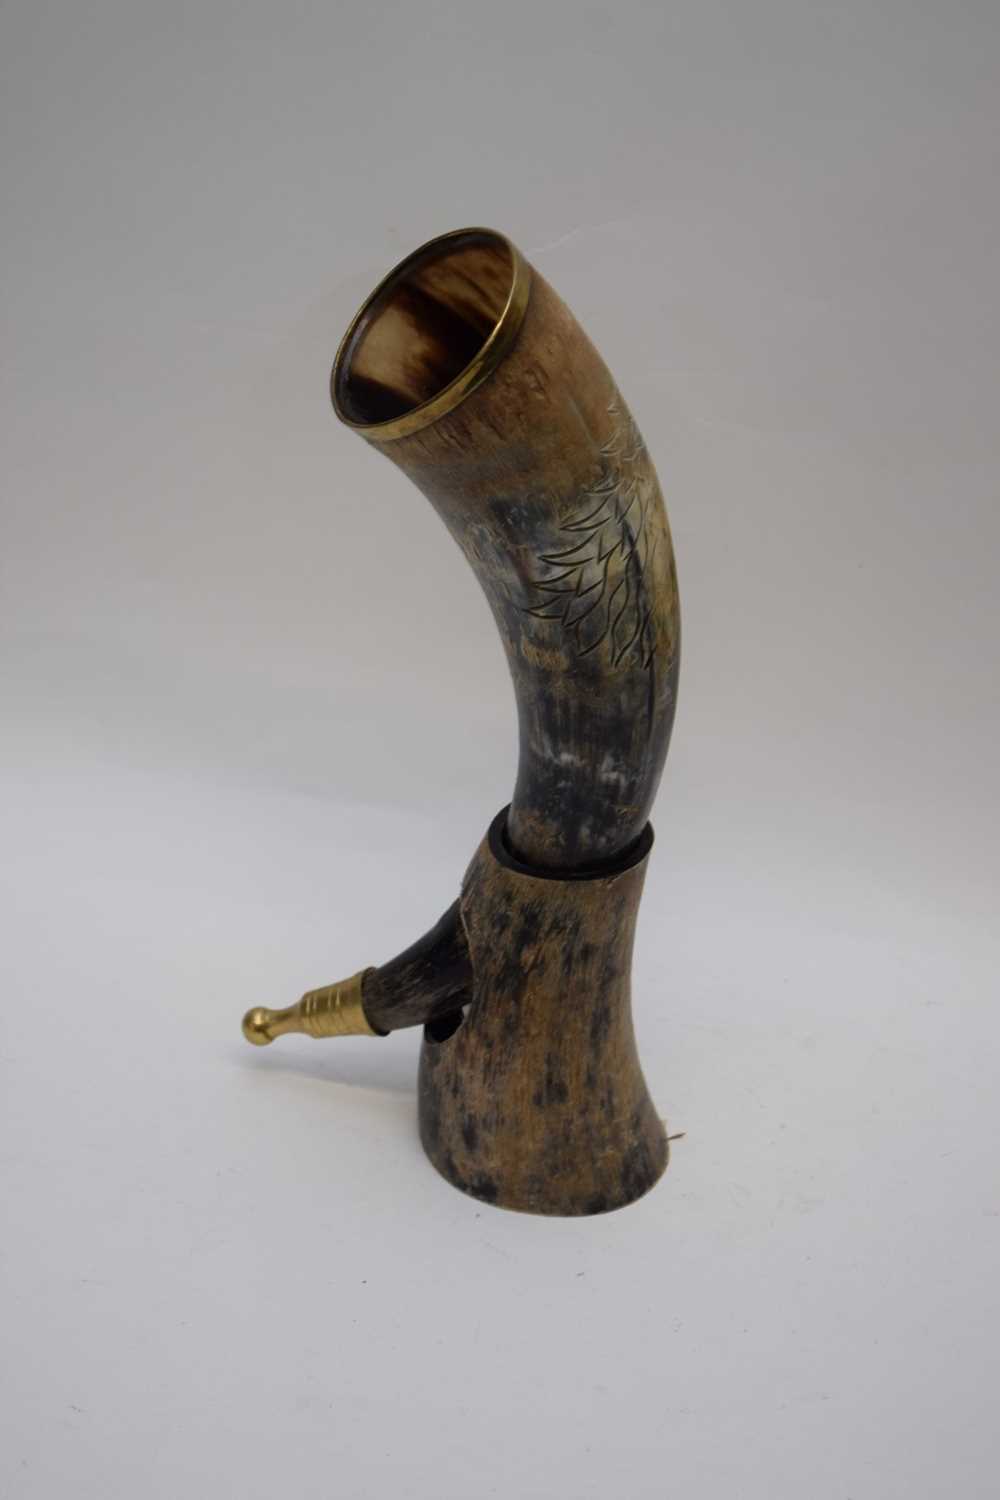 Antique brass mounted cow horn drinking vessel decorated with carved lions head detail, together